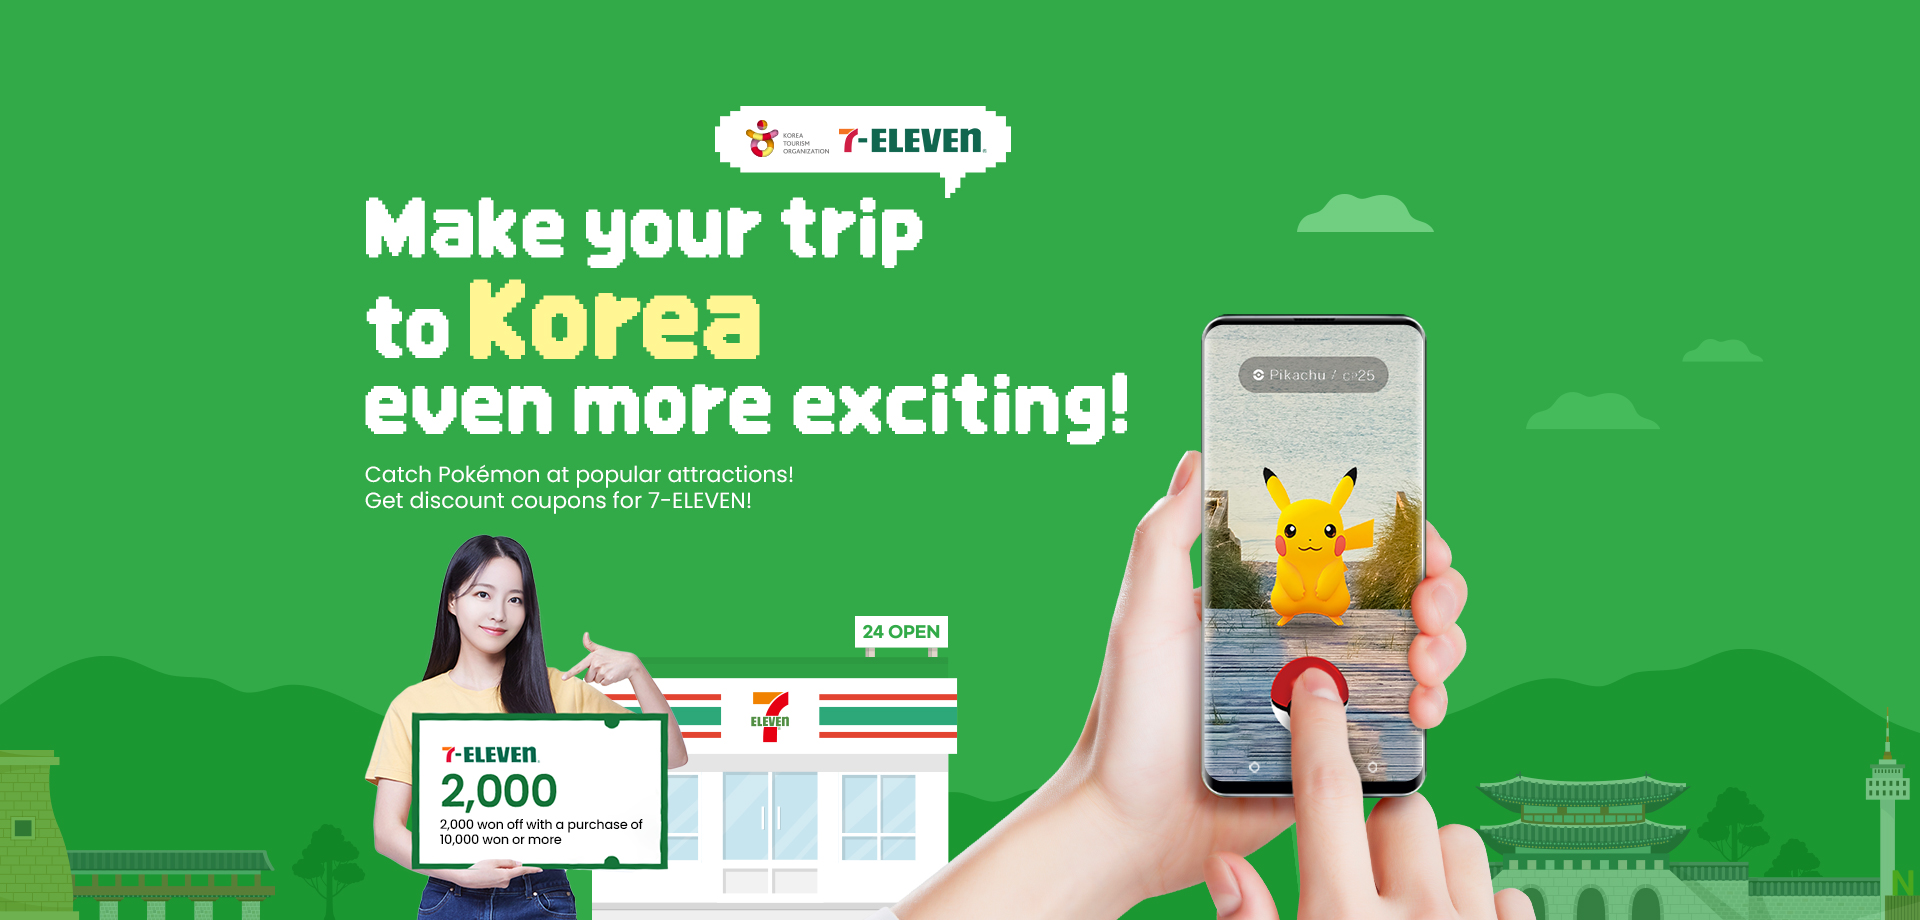 Make your trip to Korea even more exciting! Catch Pokémon at popular attractions! Get discount coupons for 7-ELEVEN! 